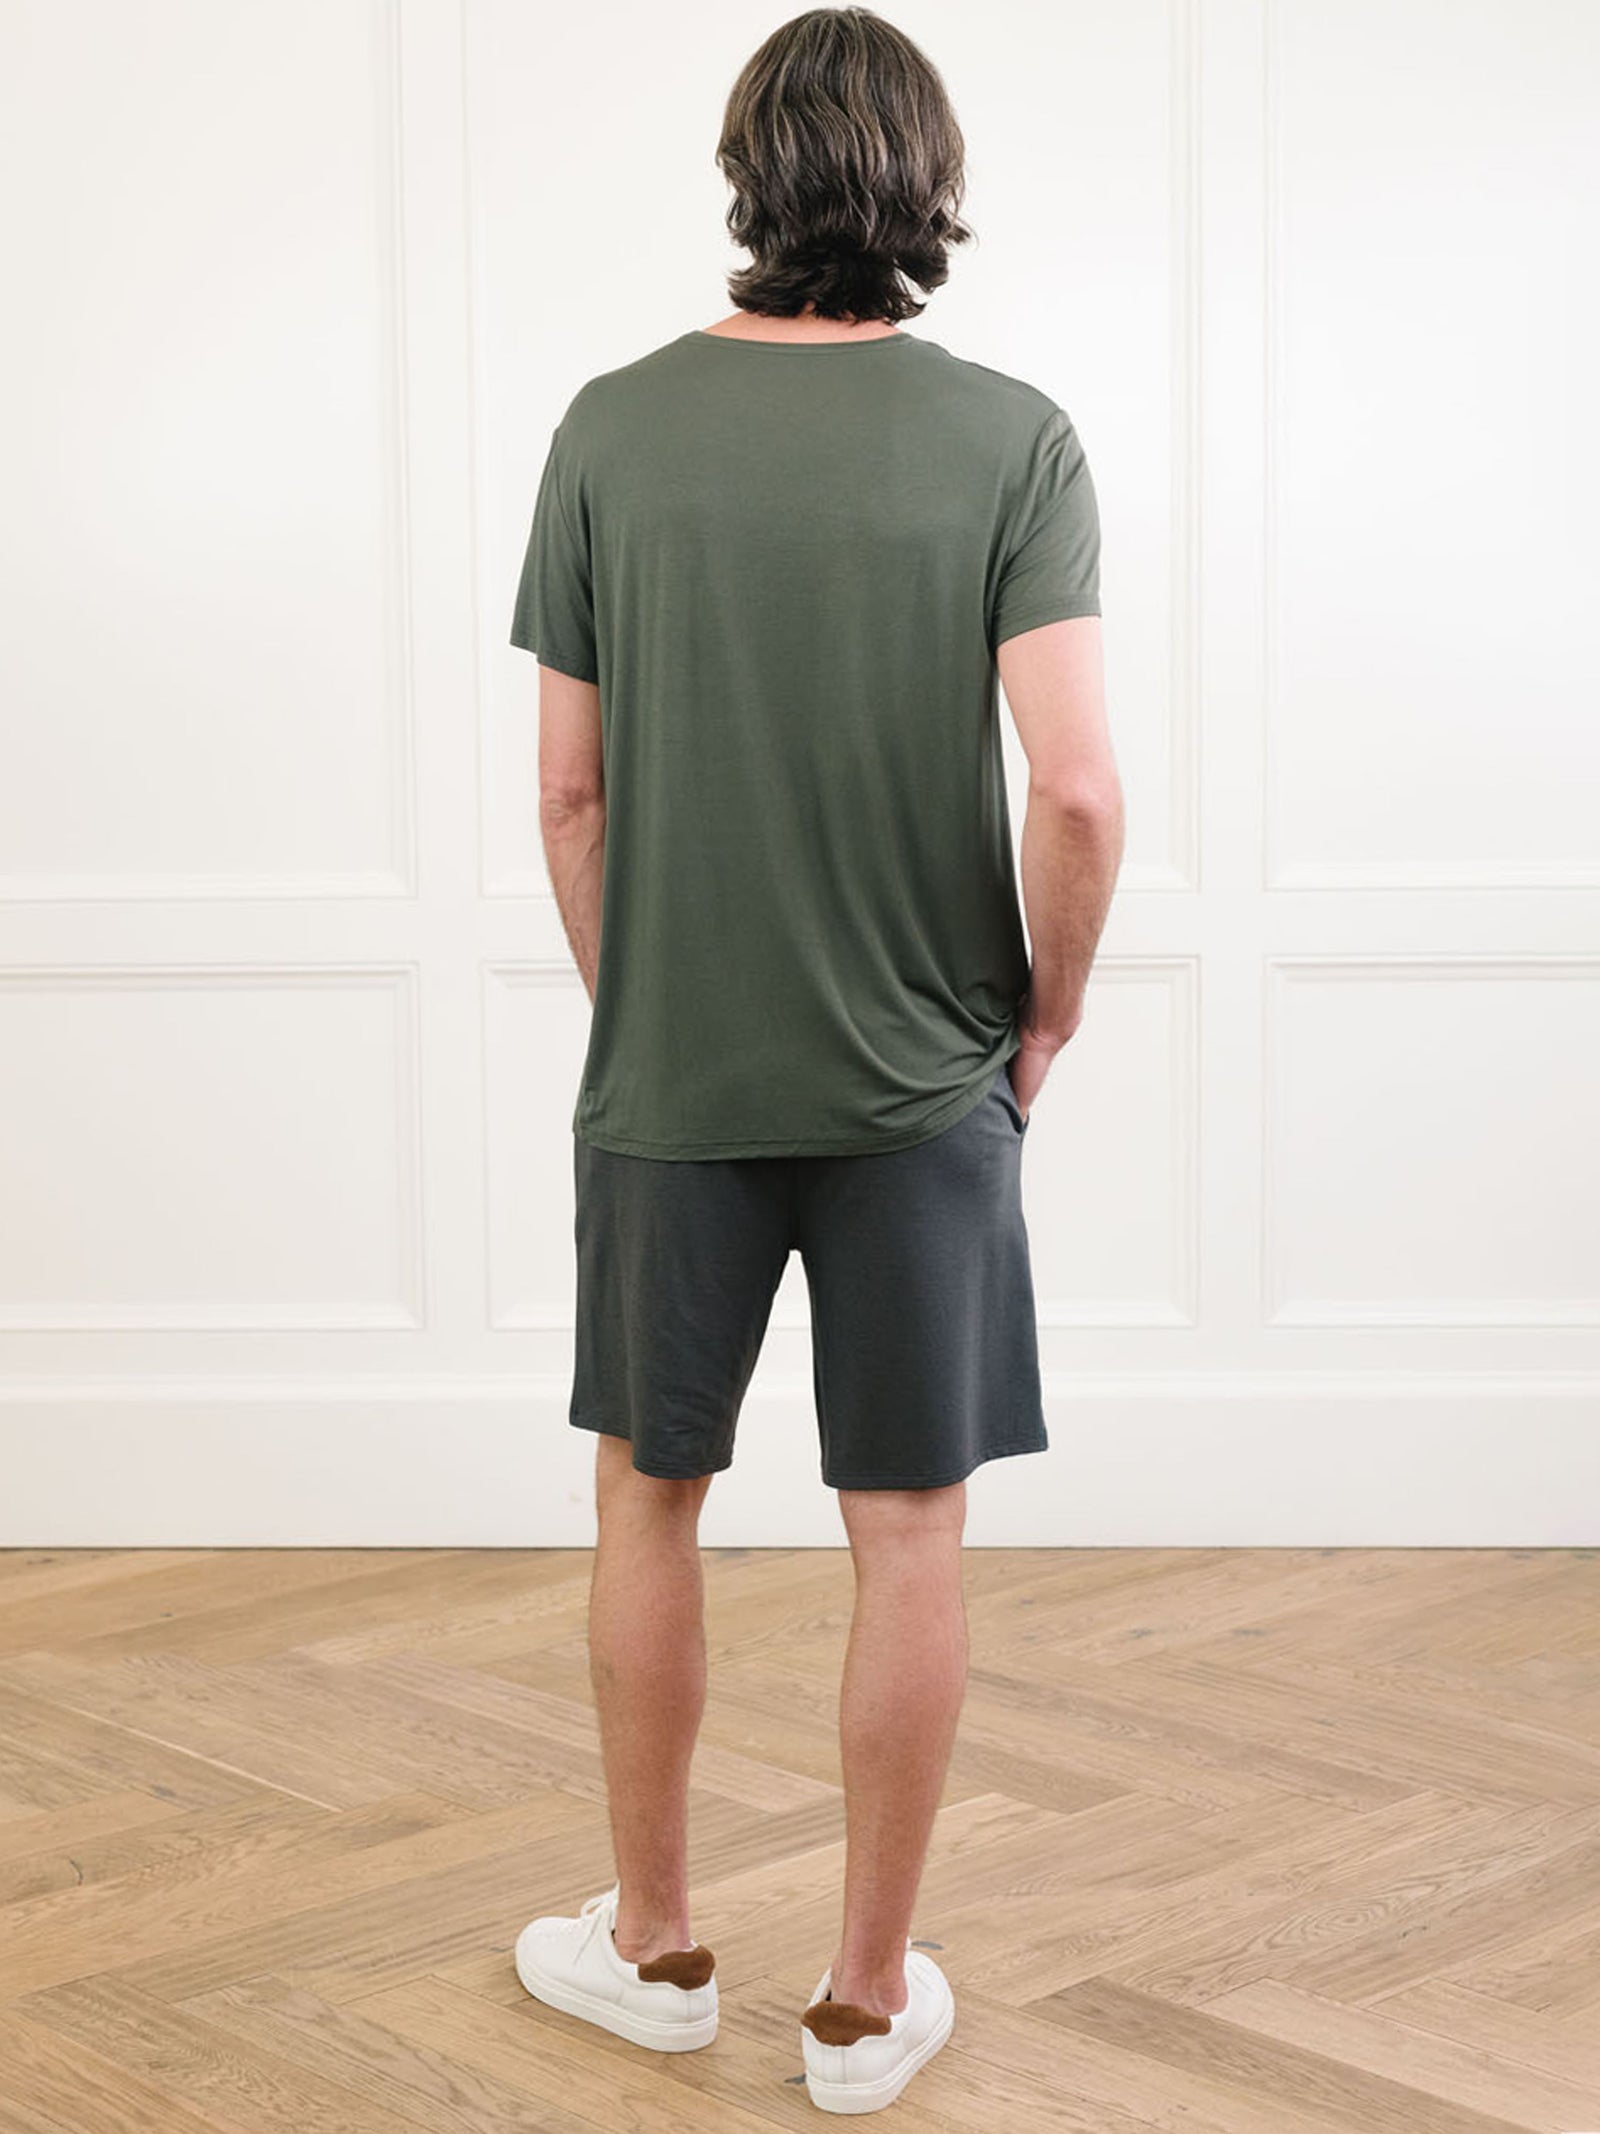 Olive Men's Stretch-Knit Bamboo Lounge Tee. A man is wearing the lounge tee in a well lit home with his back facing the camera.